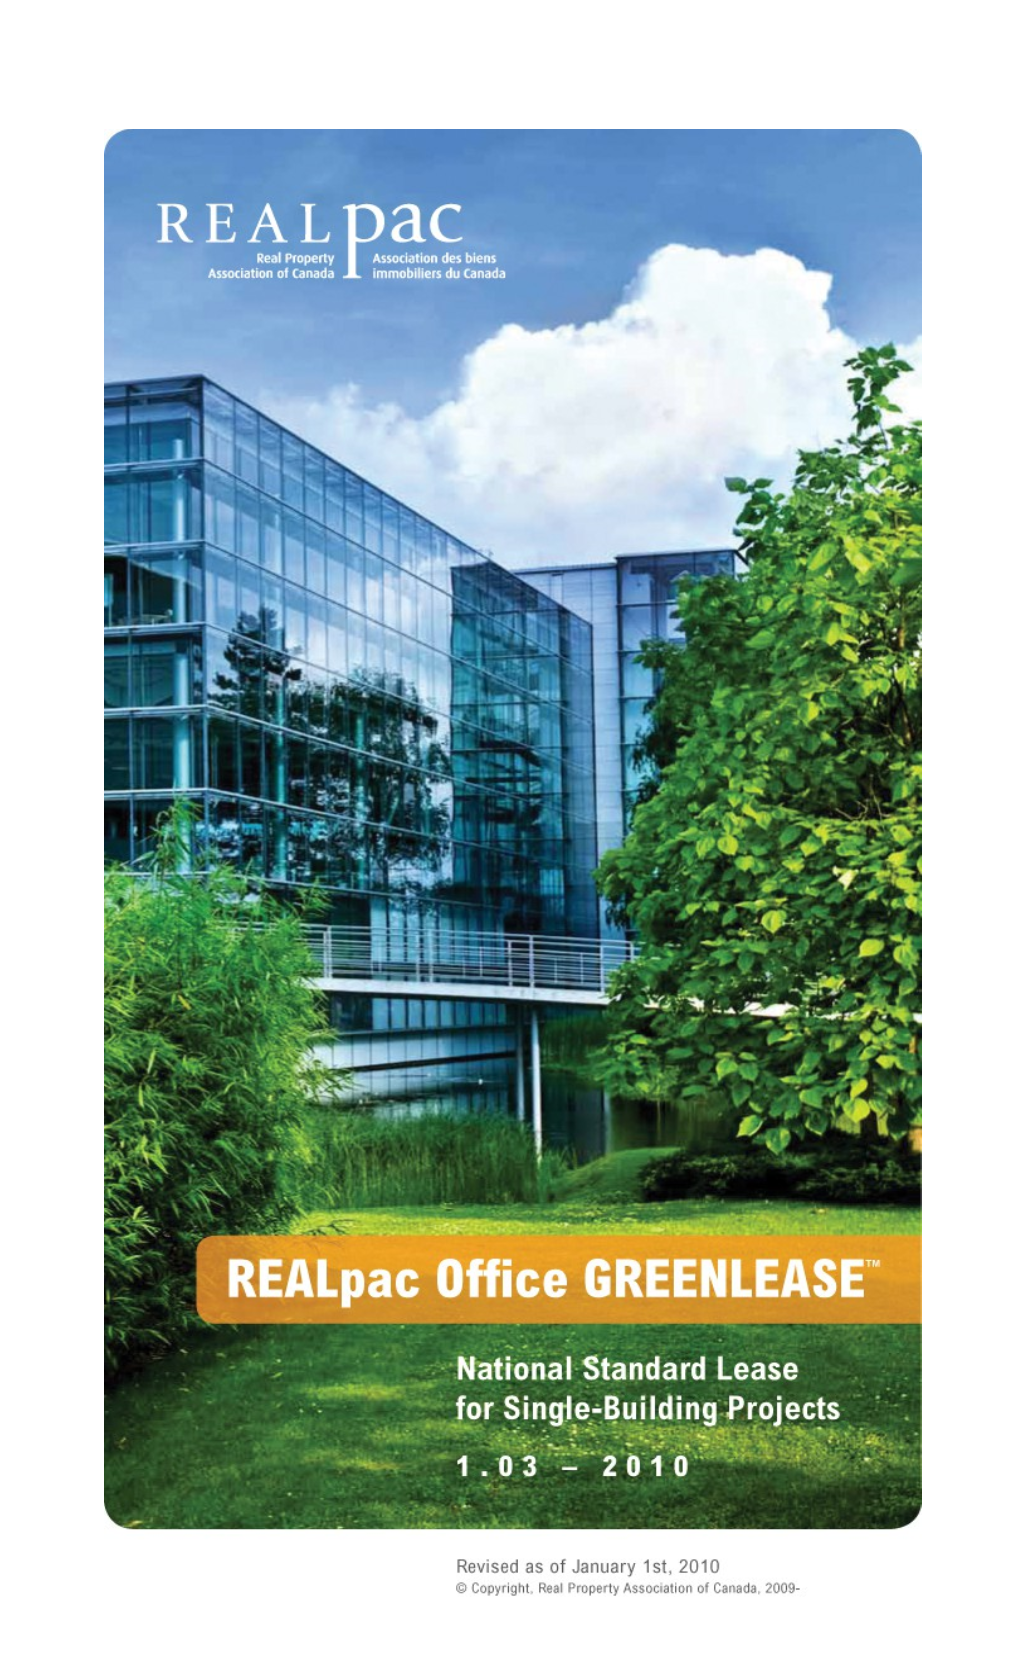 Realpac Office GREENLEASE National Standard Lease for Single-Building Projects 1.03 - 2010